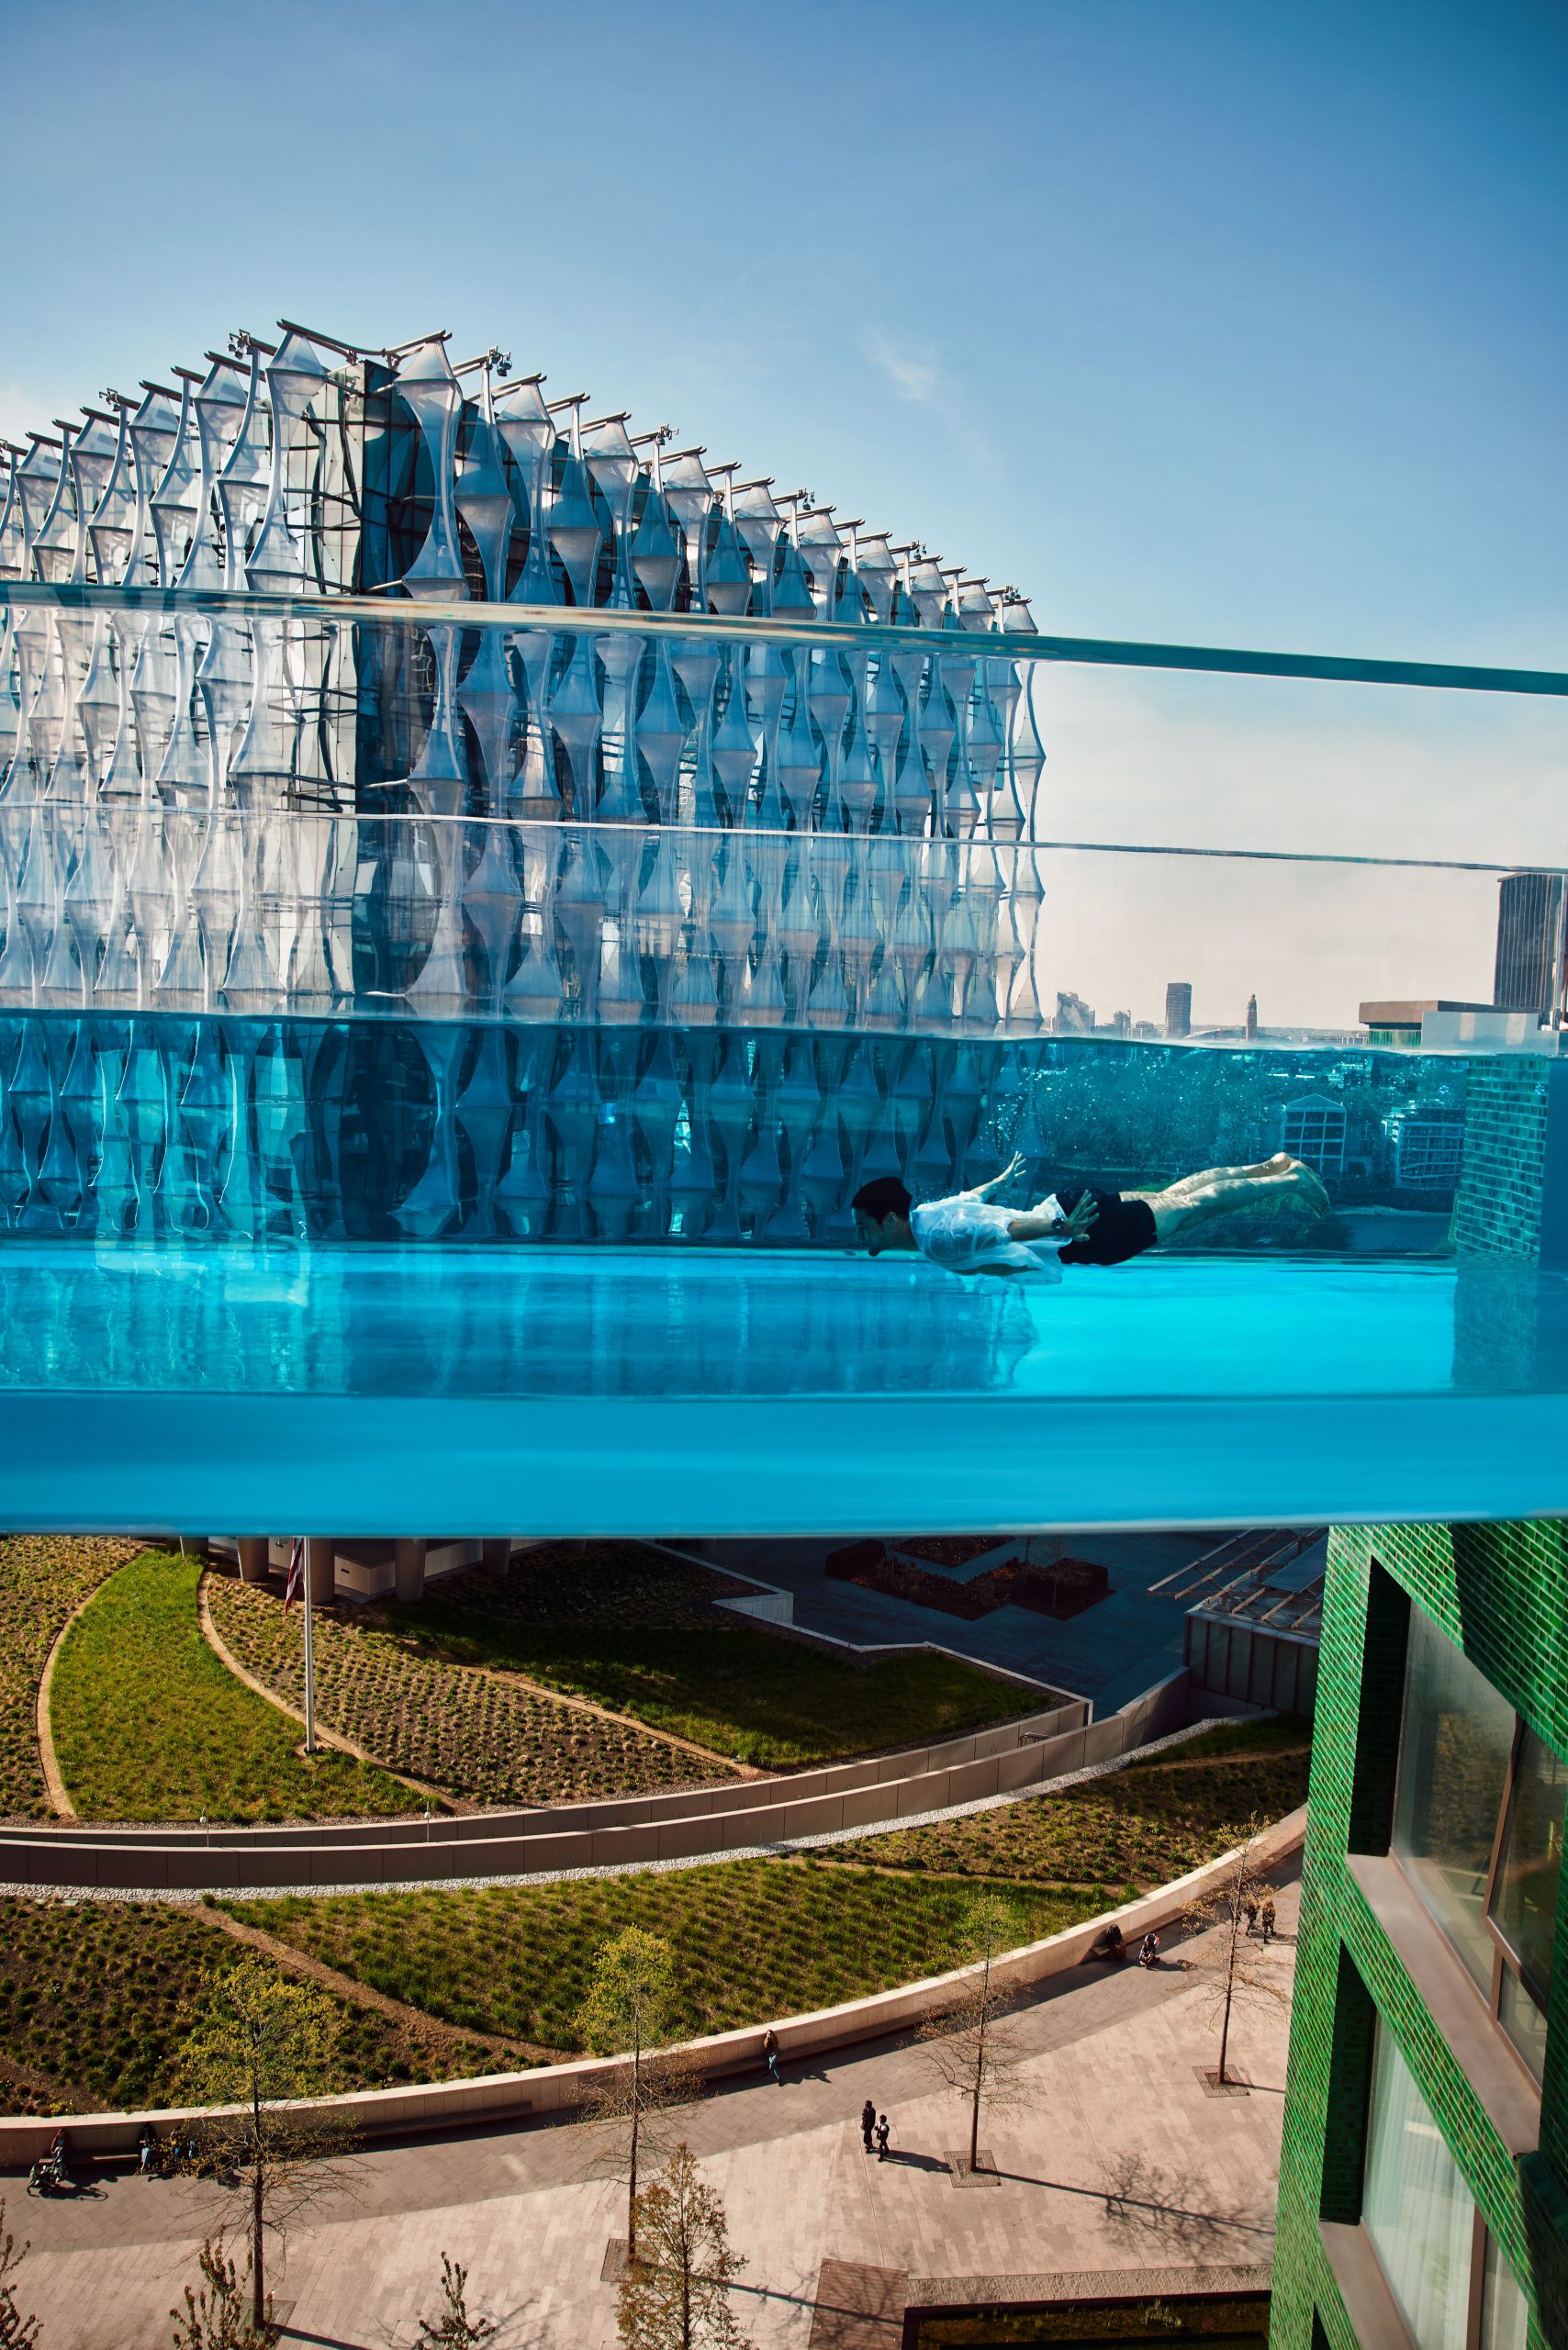 The photographers Wildash own the copyright of these images of the Embassy Gardens Sky Pool